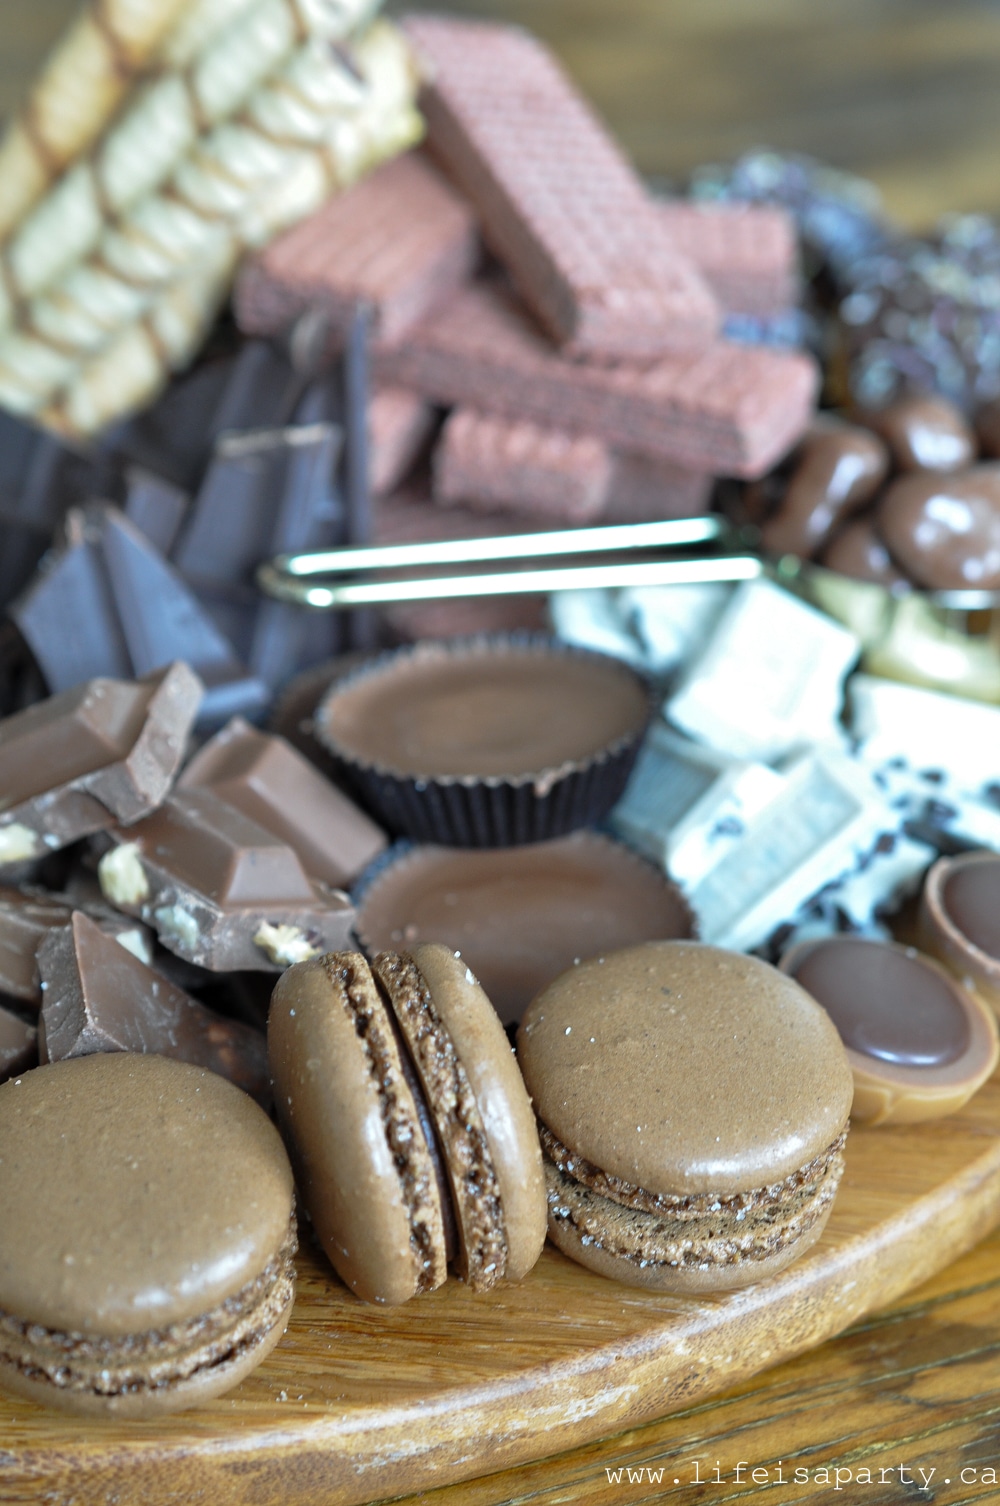 Chocolate macaroons and other chocolate treats